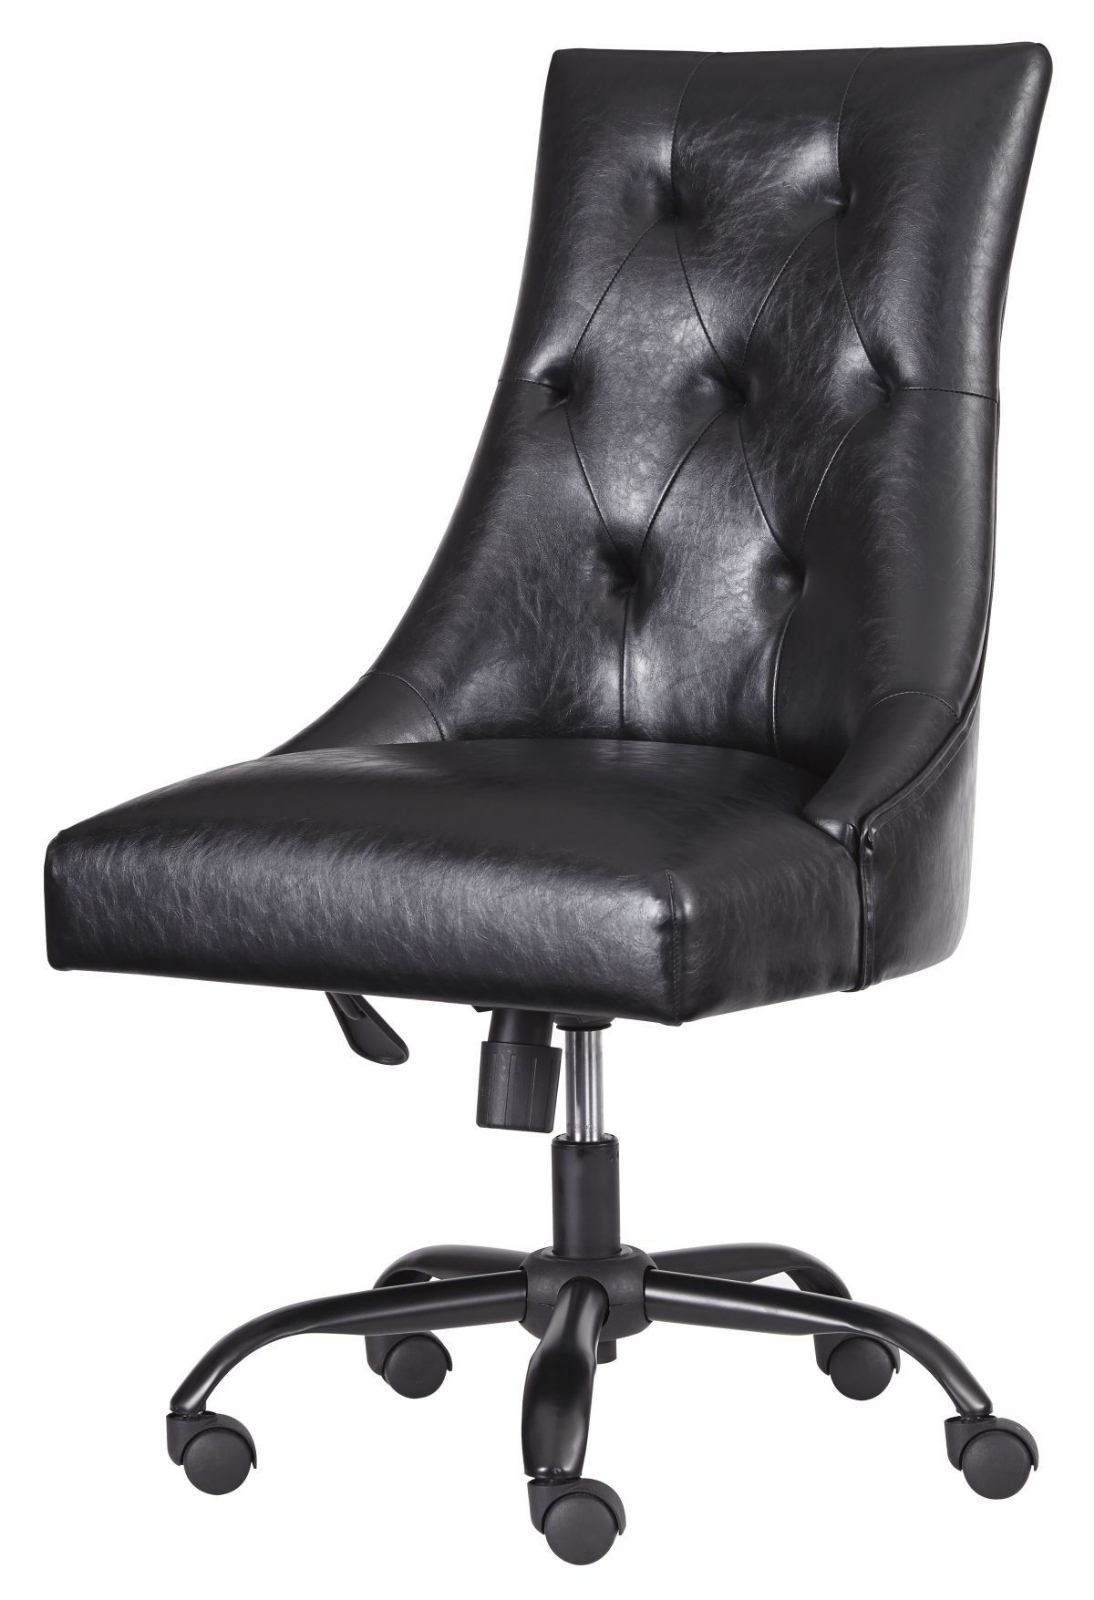 Picture of Office Chair Program Desk Chair